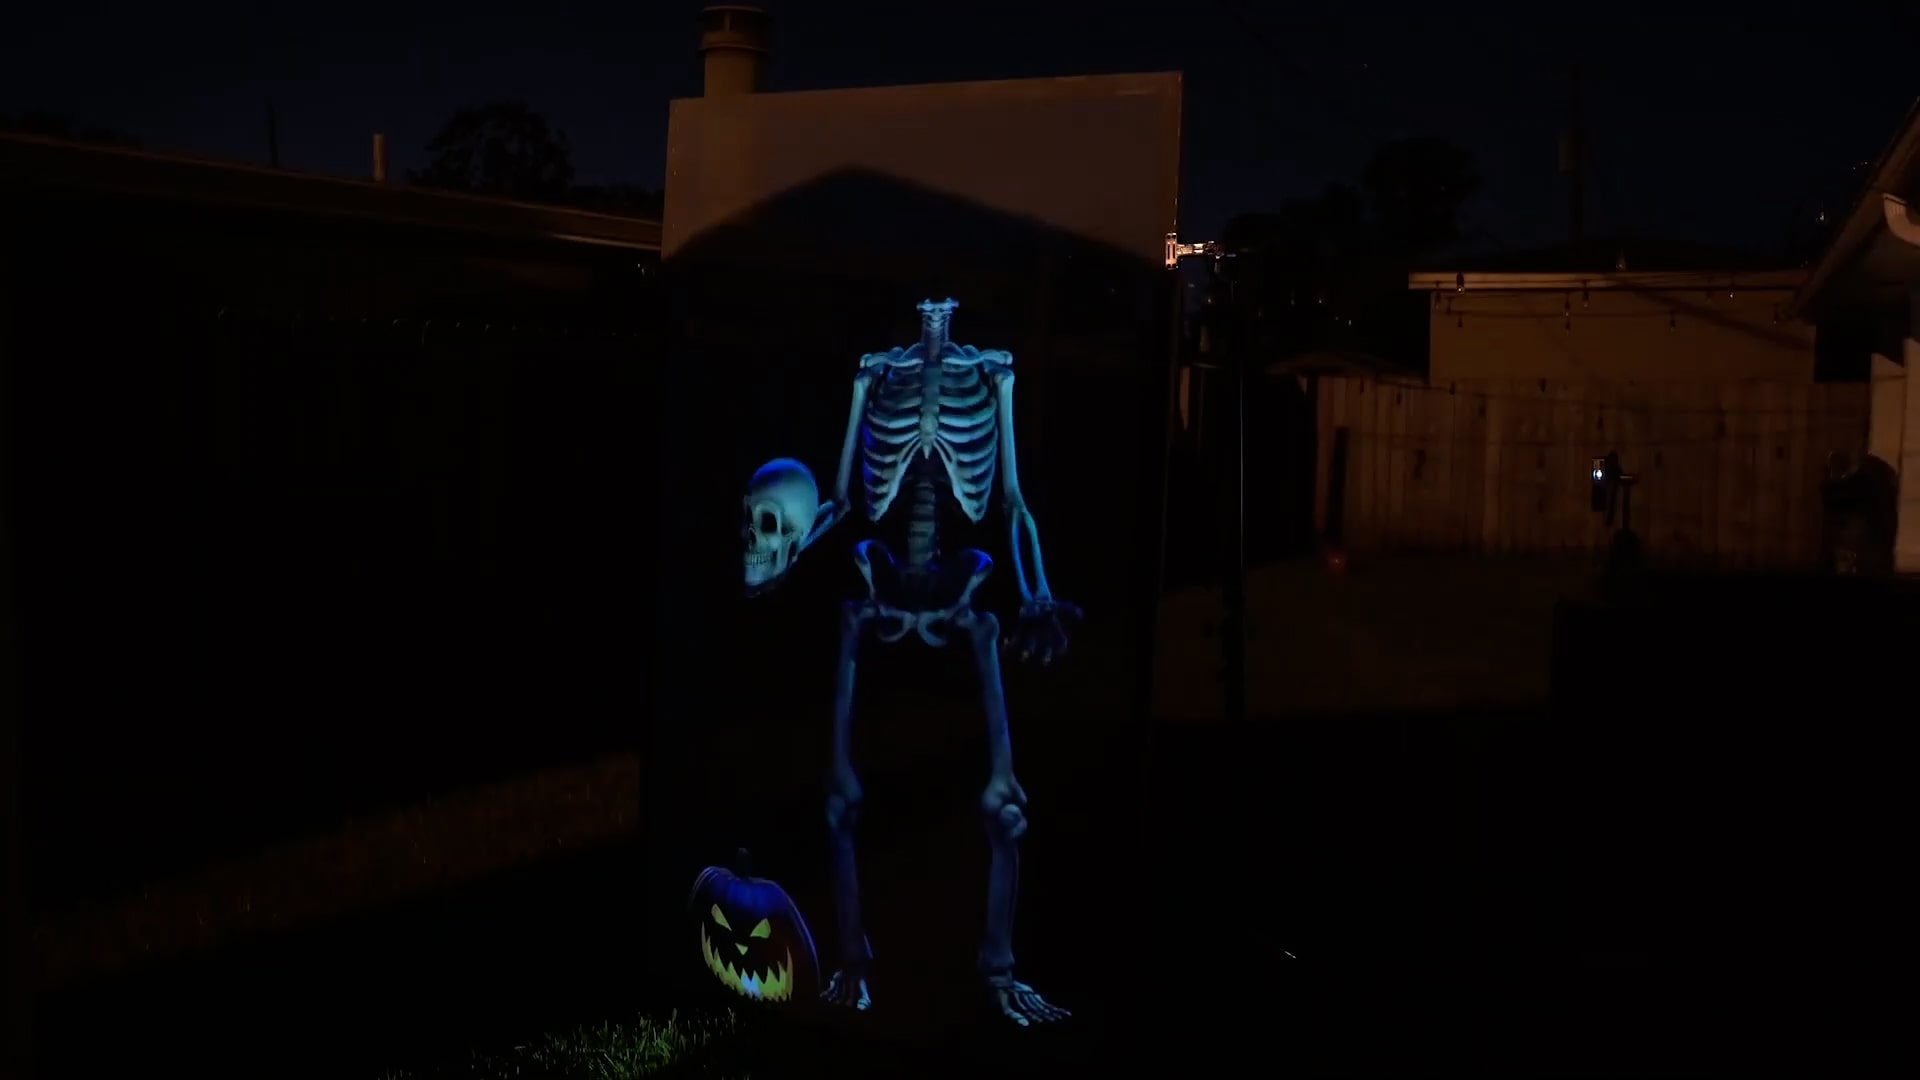 M7 Special FX - Projected Headless Skeleton in the dark